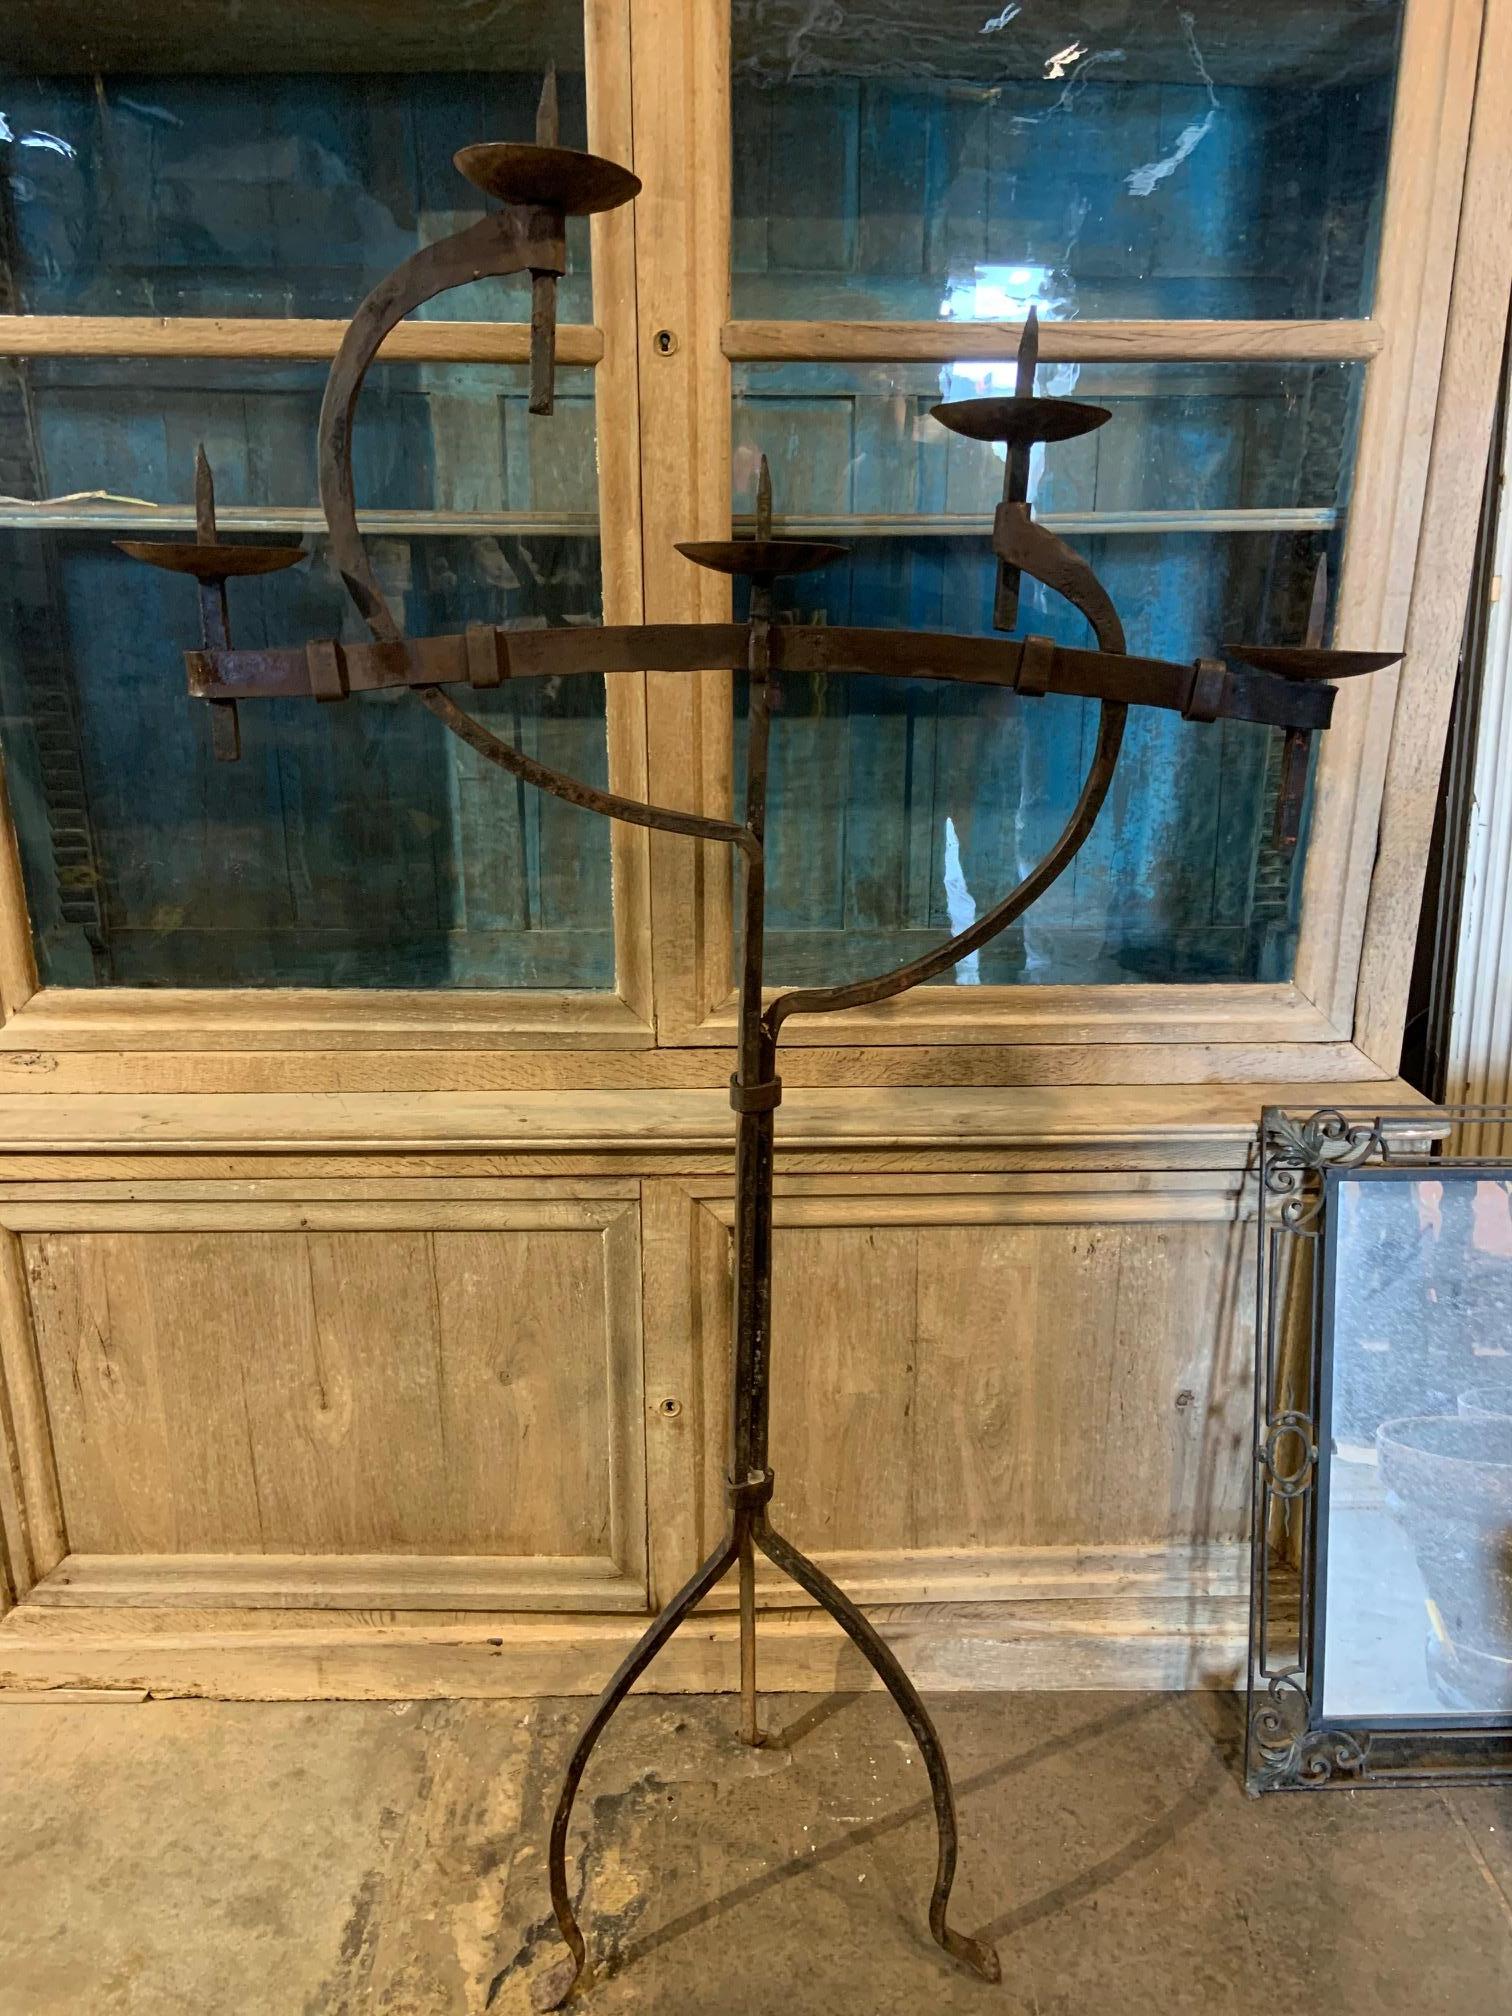 A very intriguing later 19th century French torchère - Standing candelabra - in expertly hand forged iron. A beautiful art piece.